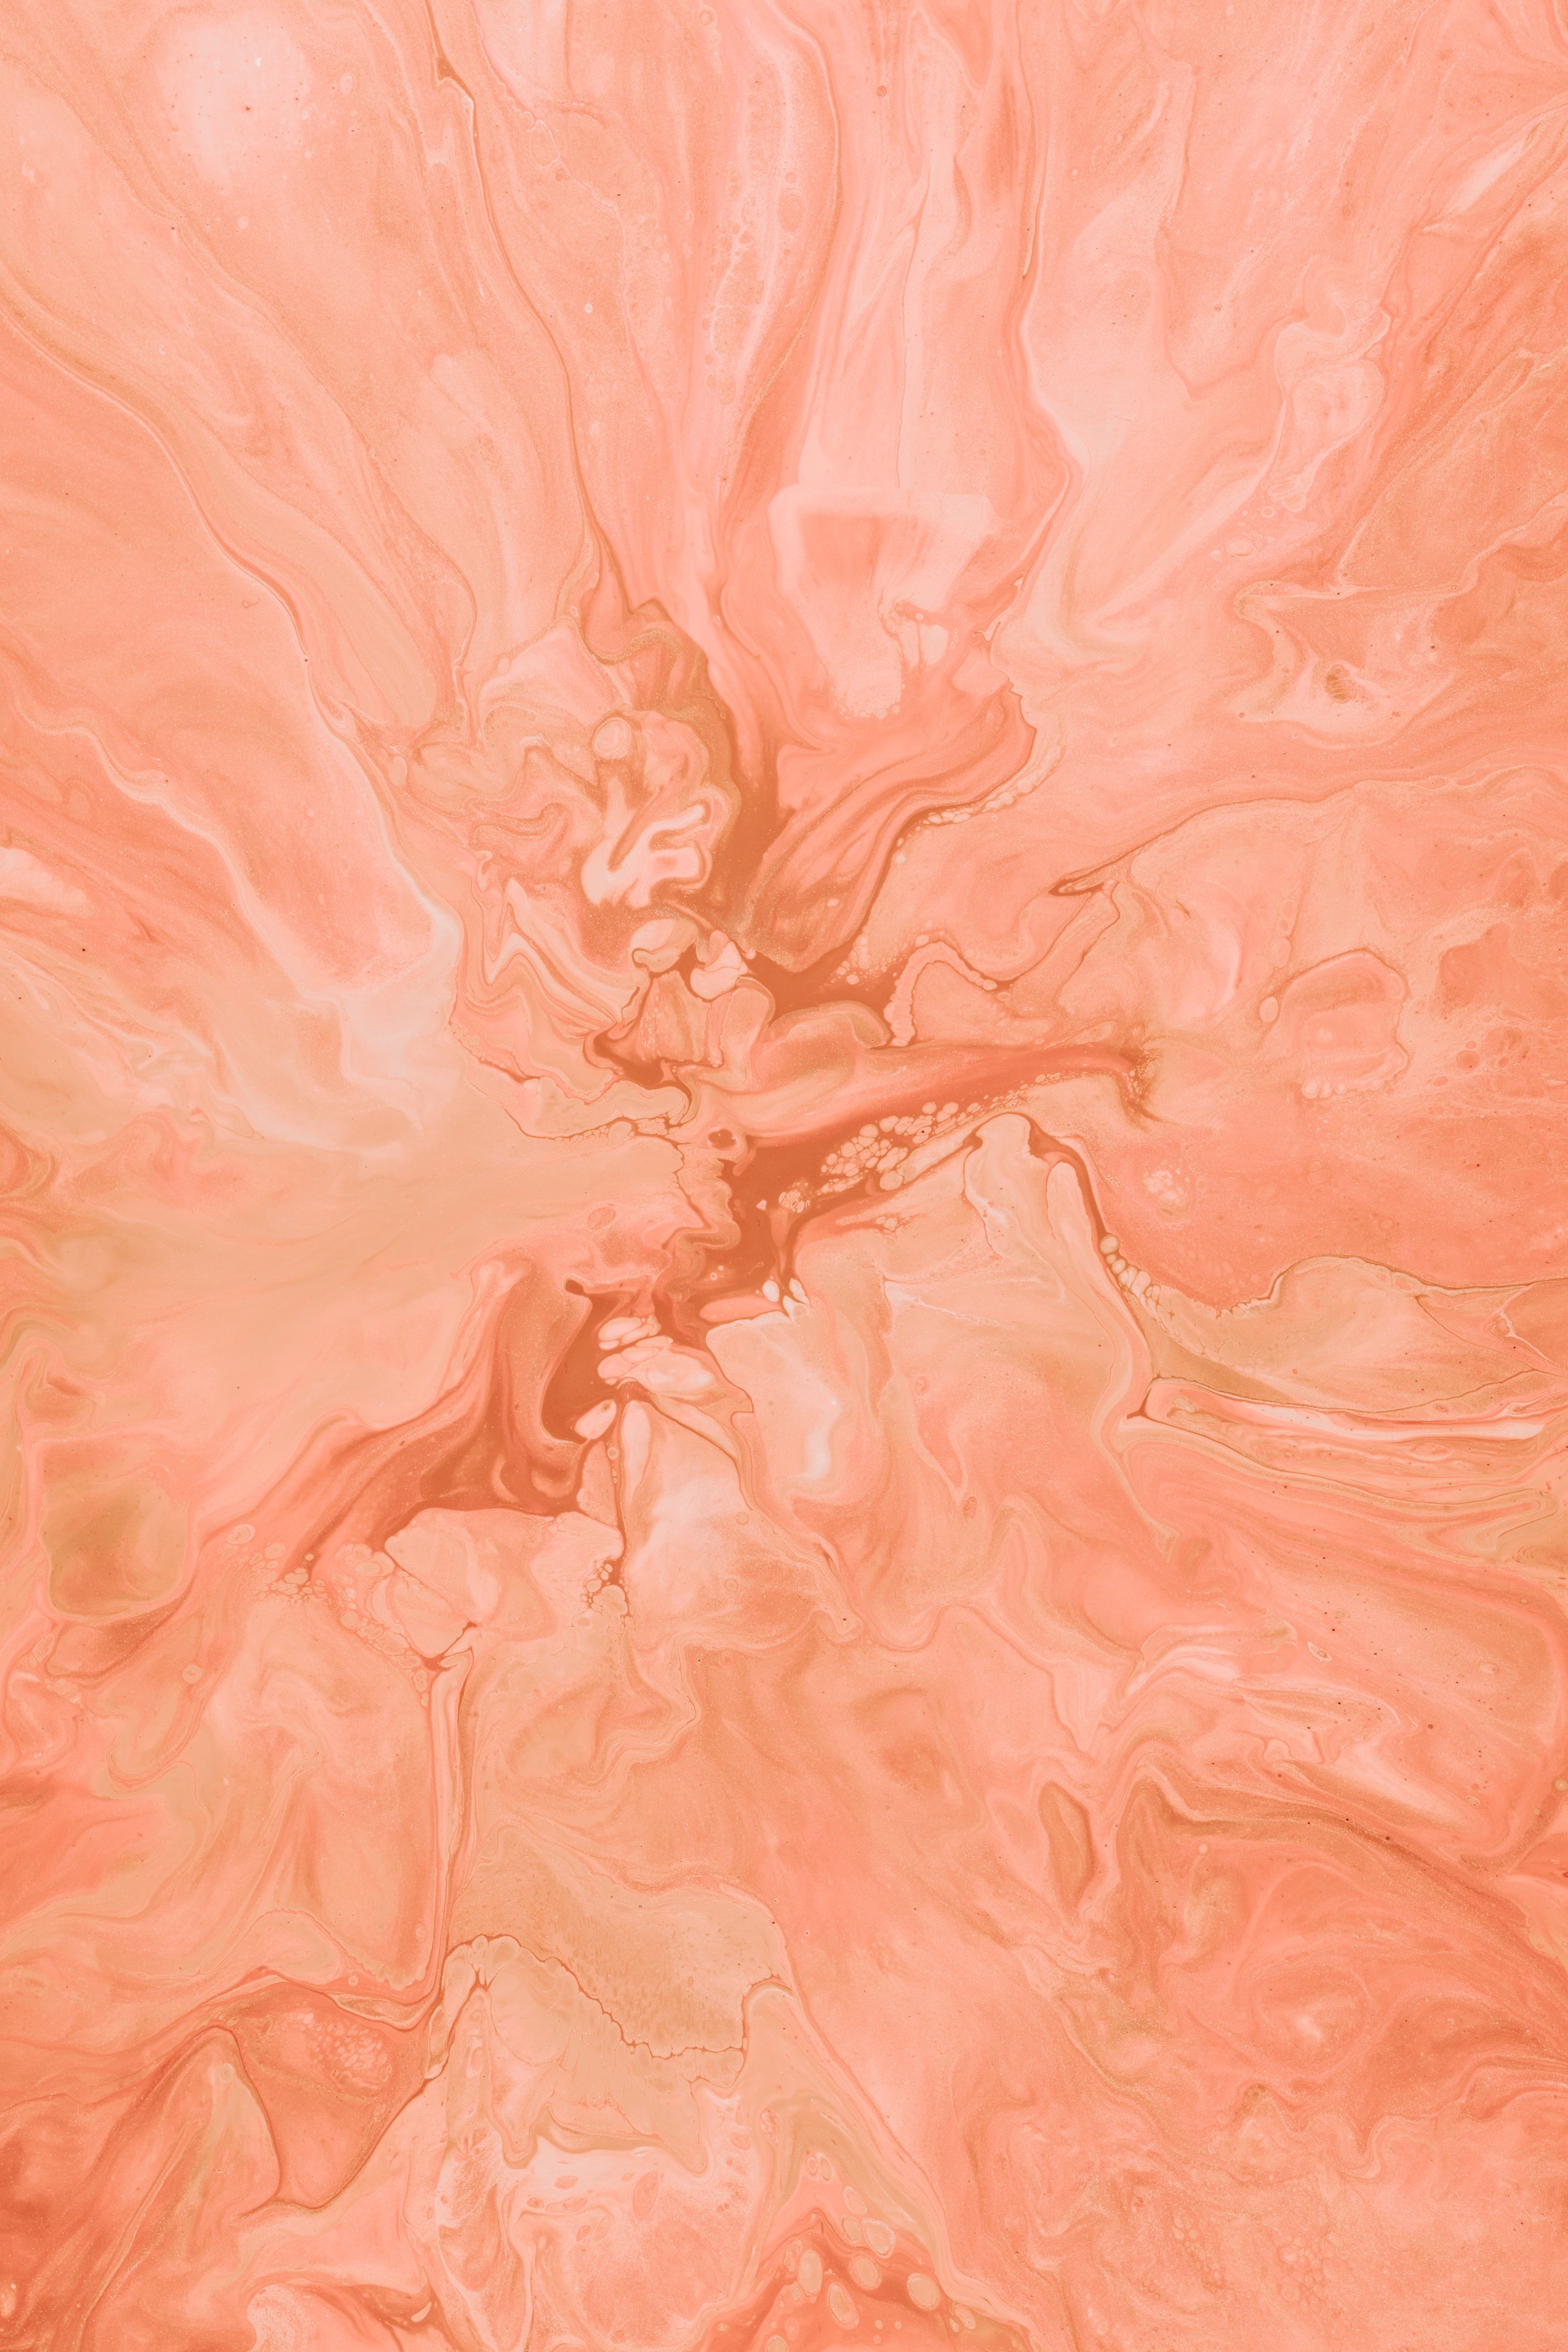 A close up of an orange and pink abstract painting - Orange, coral, pastel orange